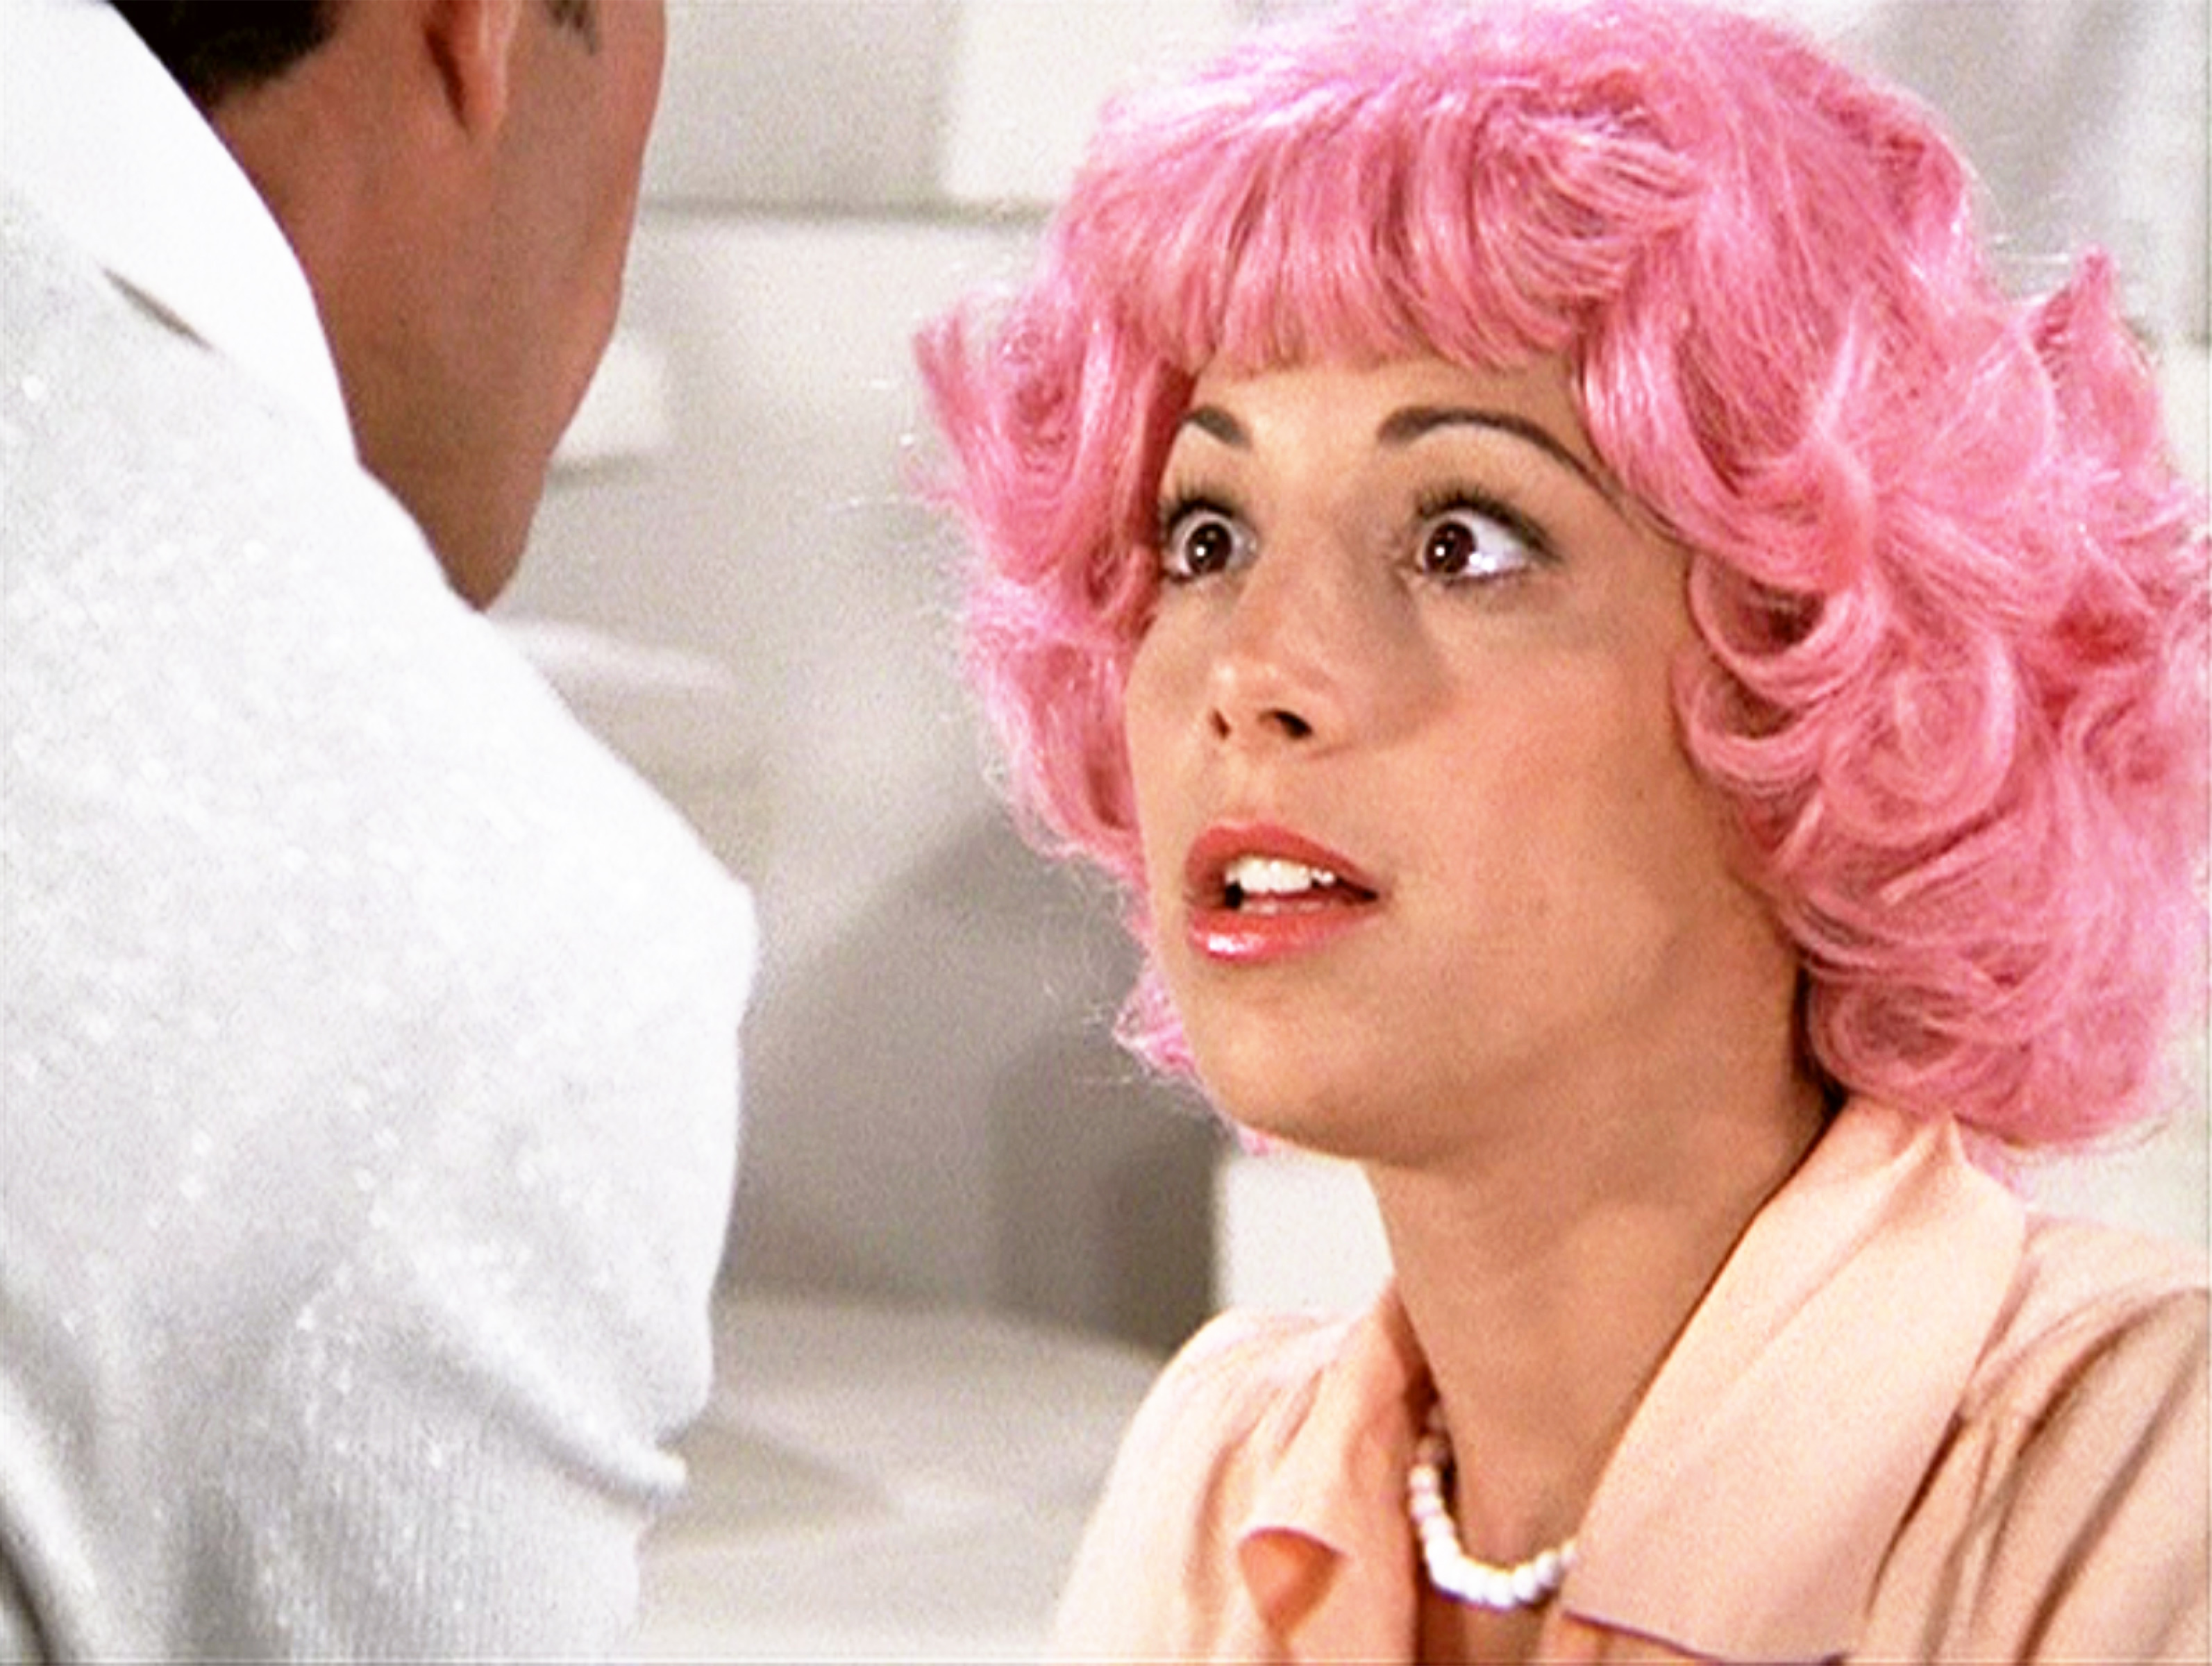 Didi Conn pictured as Frenchy in the film "Grease" on June 16, 1978 | Source: Getty Images